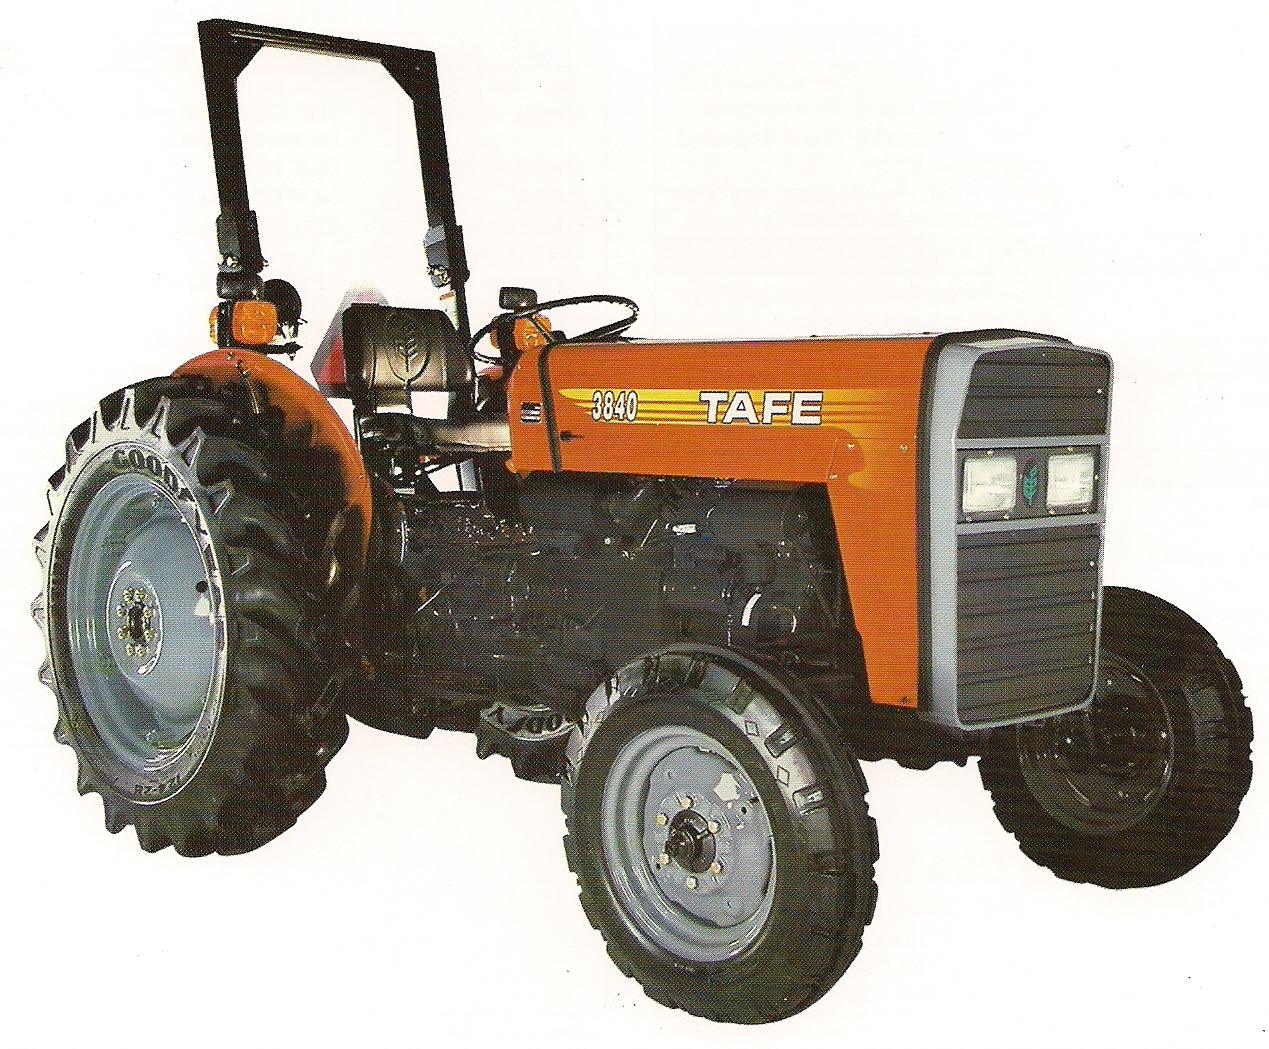 TAFE 3840 ECO - Tractor & Construction Plant Wiki - The classic ...